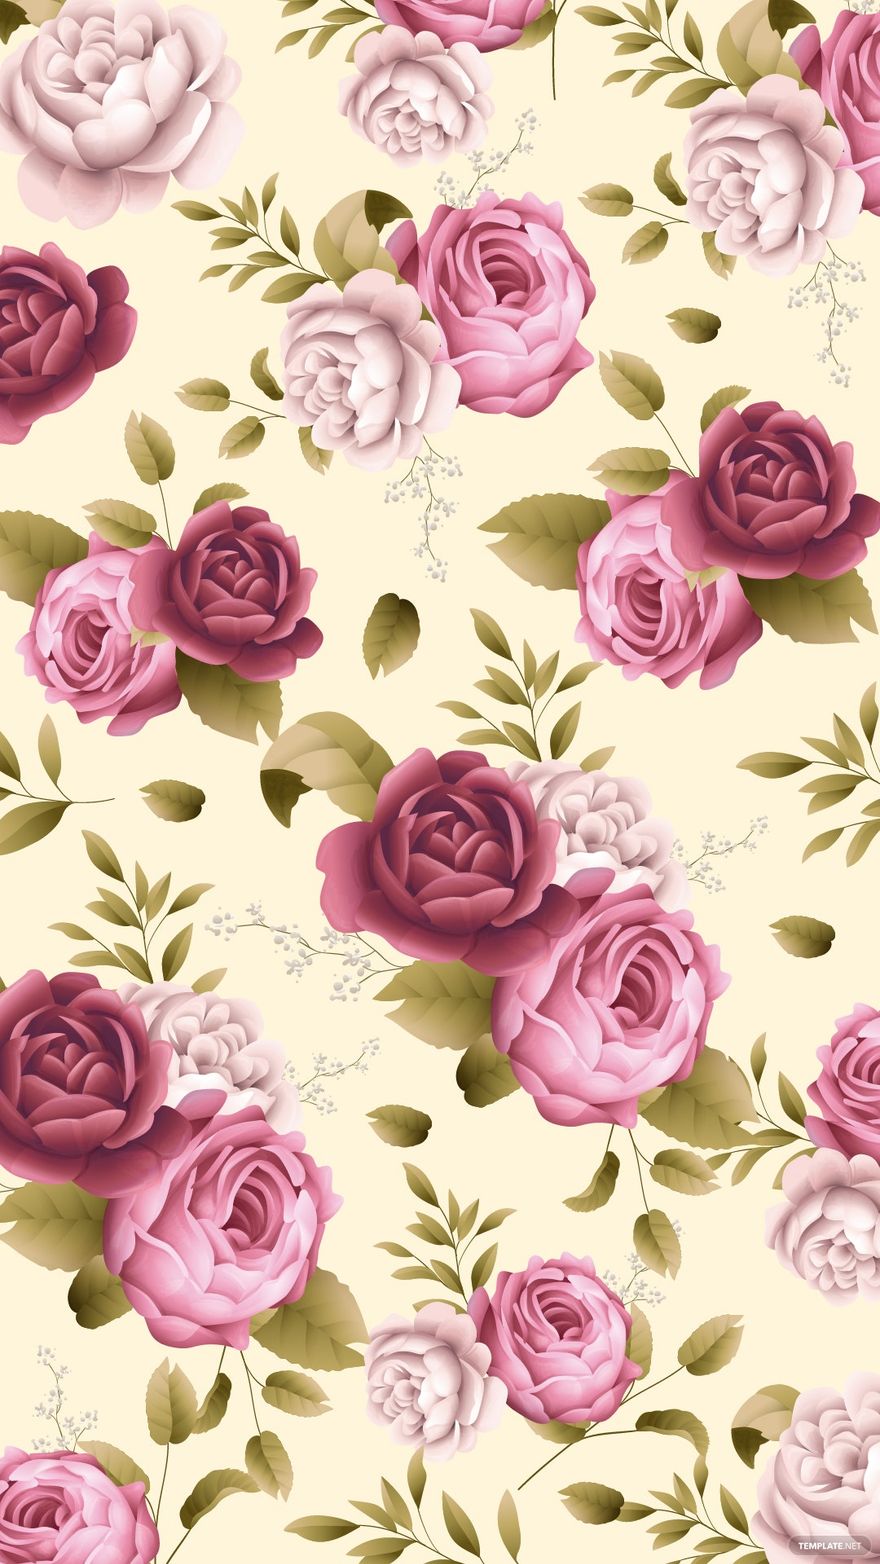 Pastel Floral Iphone Background